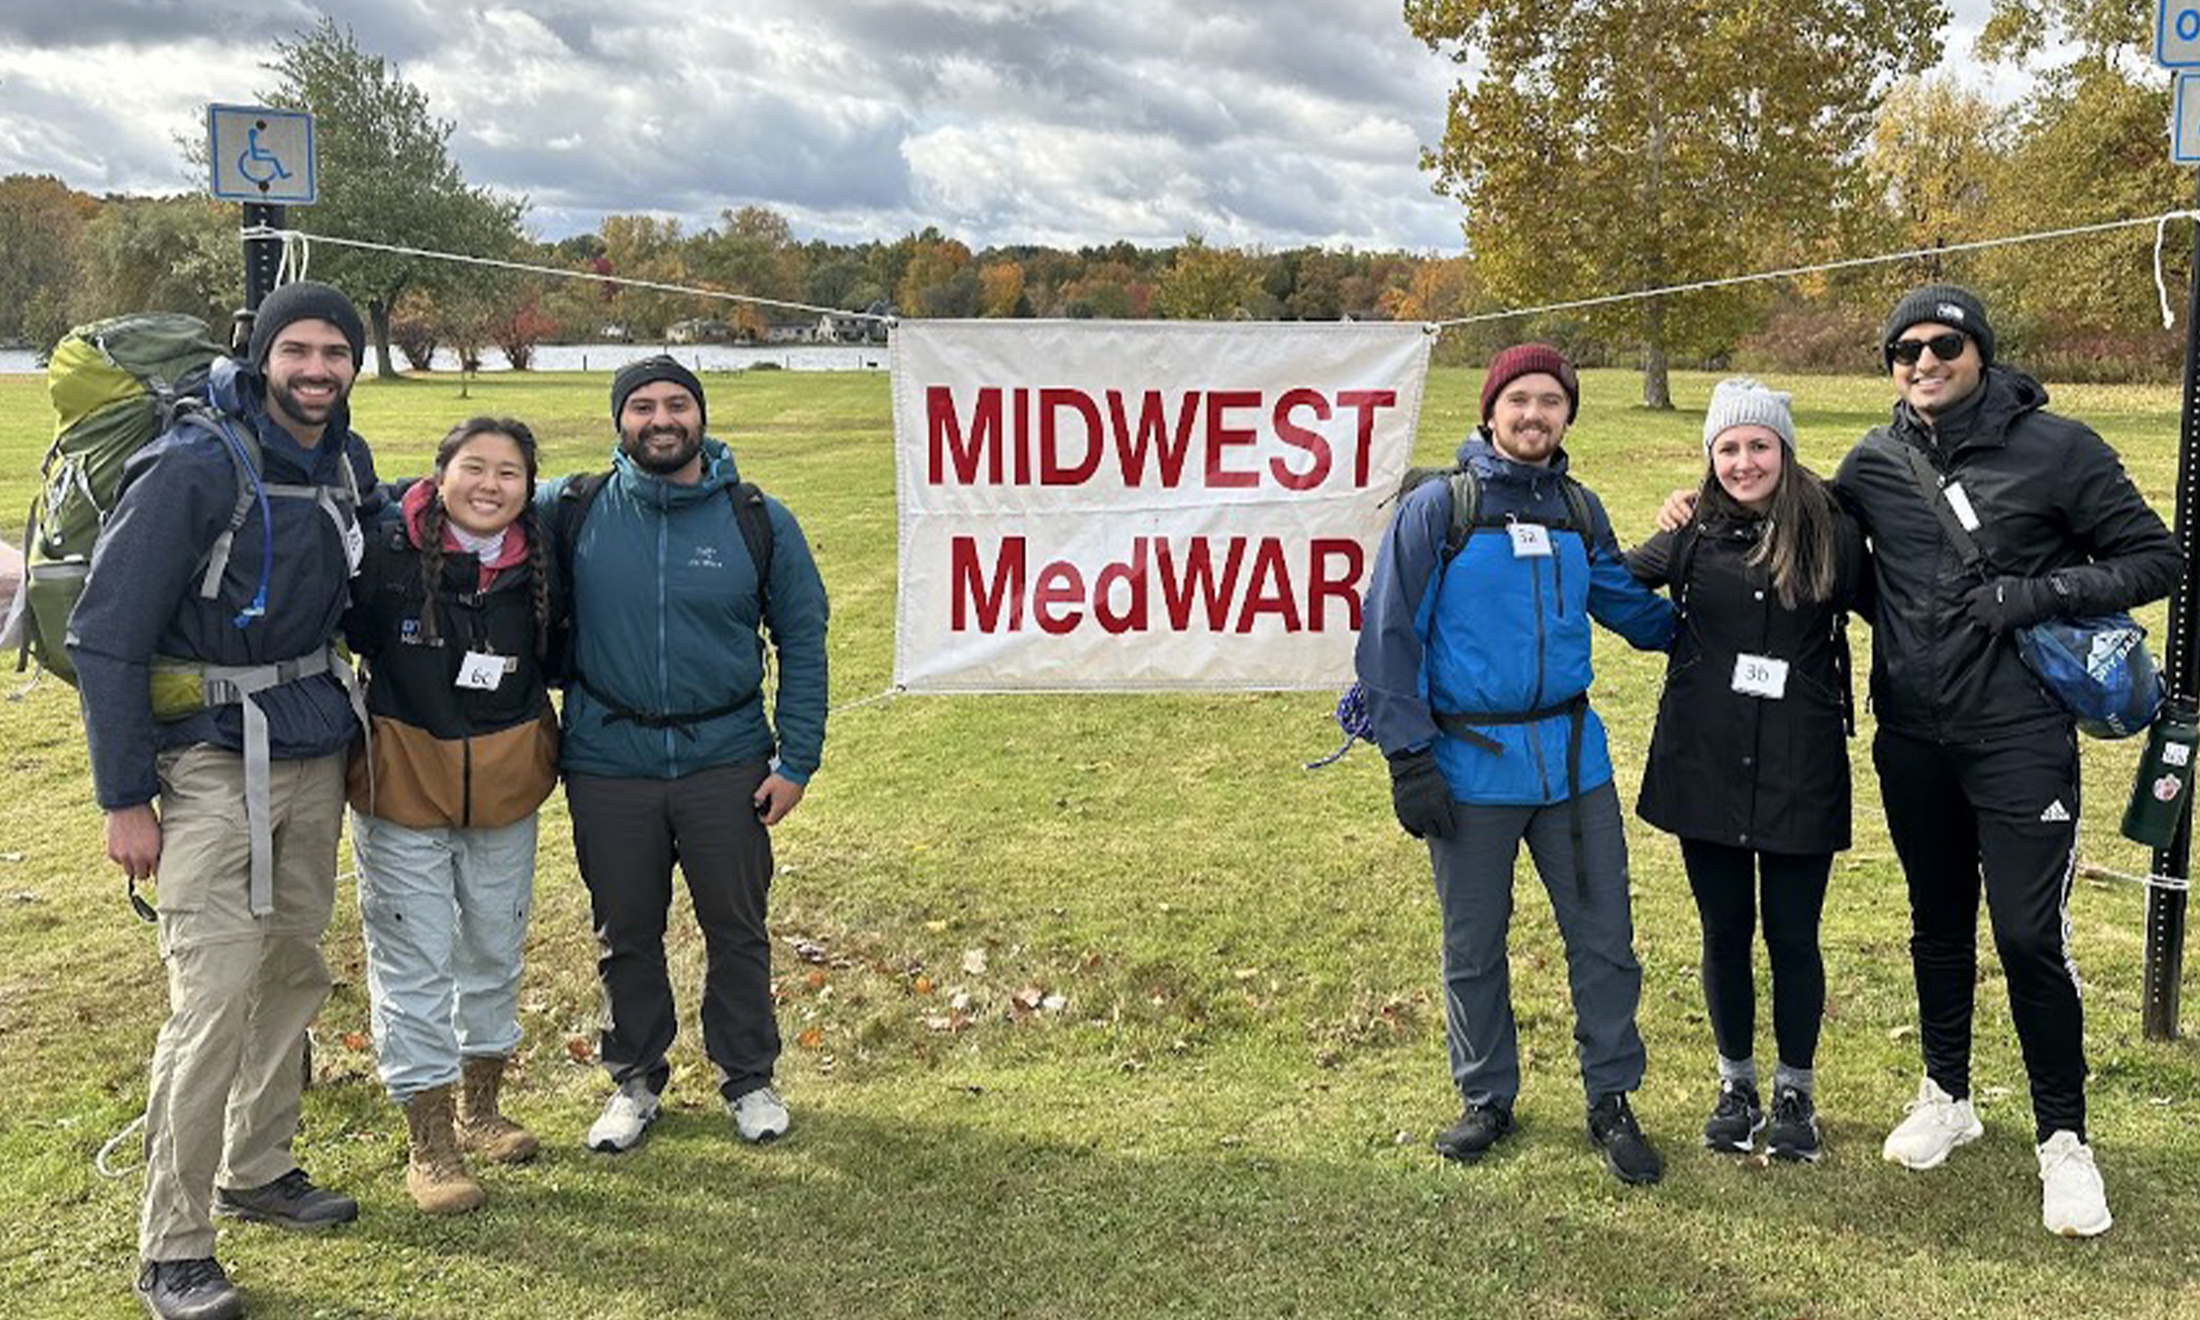 An image of Midwest MedWAR participants